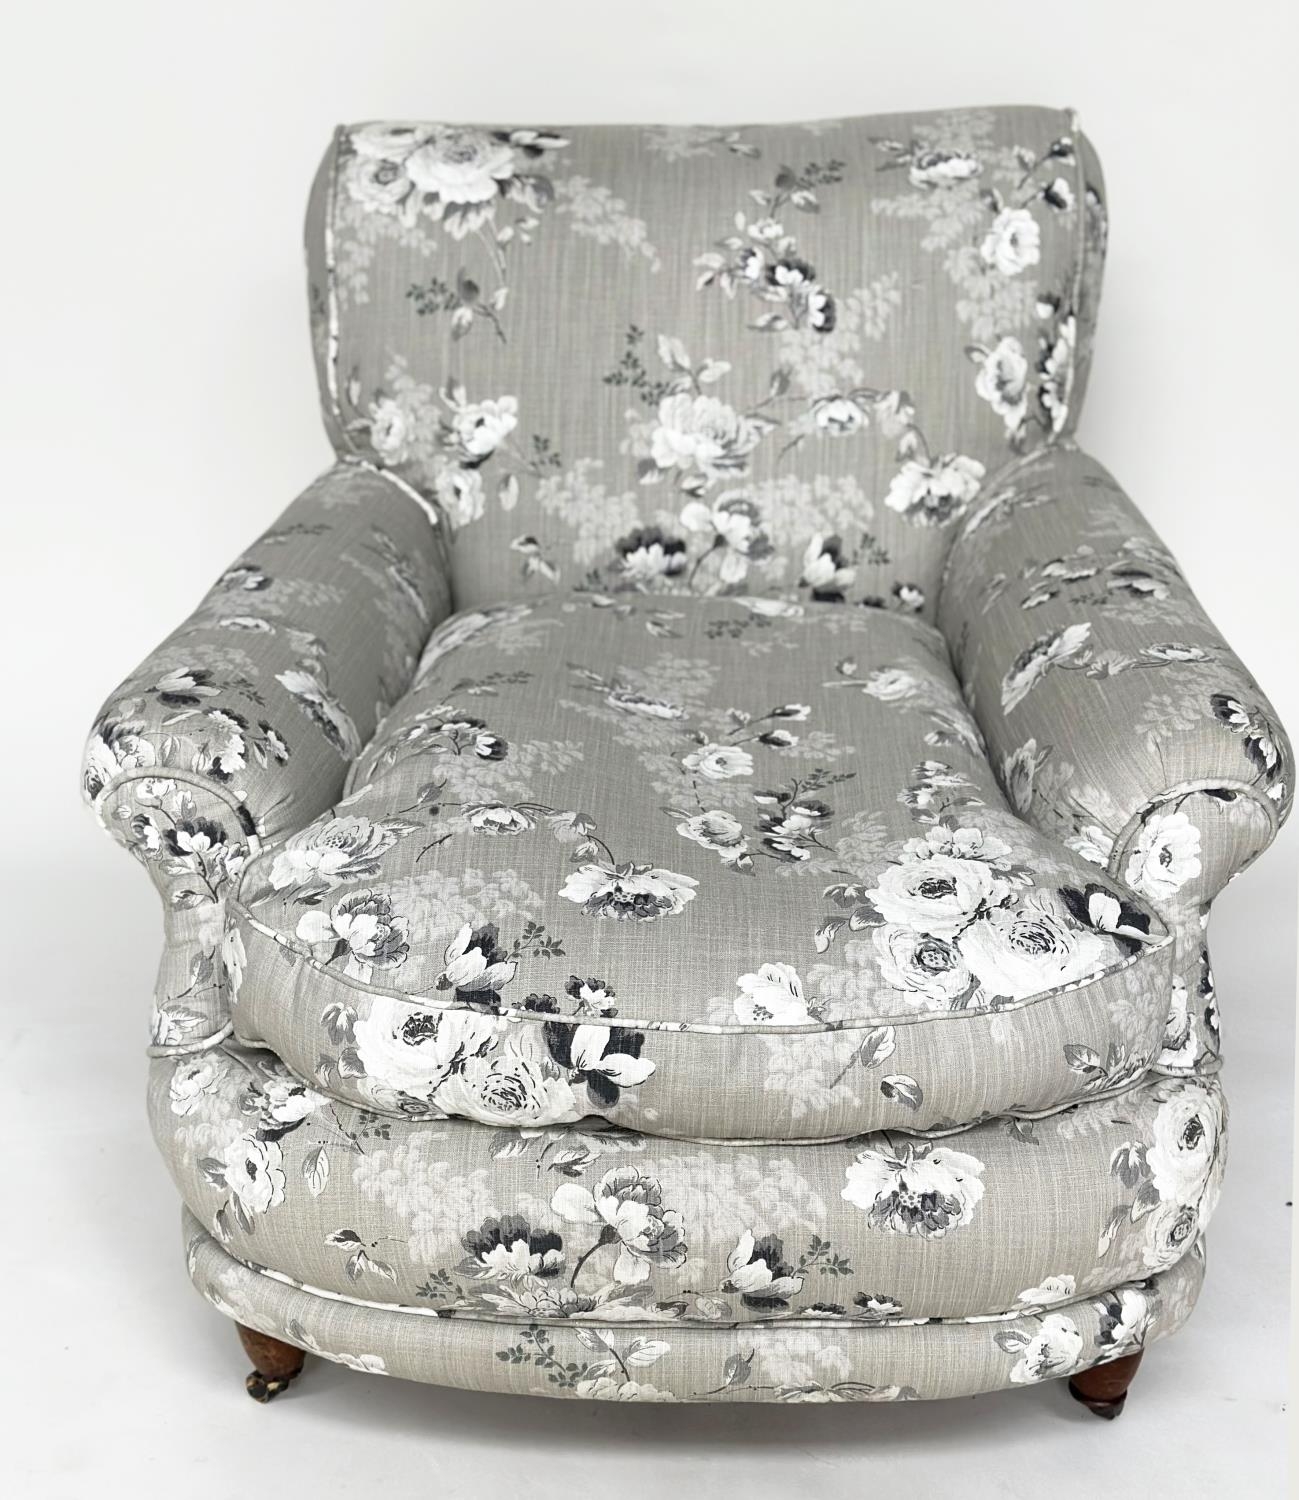 WILLIAM BIRCH ARMCHAIR, 19th century Howard type, newly upholstered in grey linen impressed numerals - Image 10 of 13